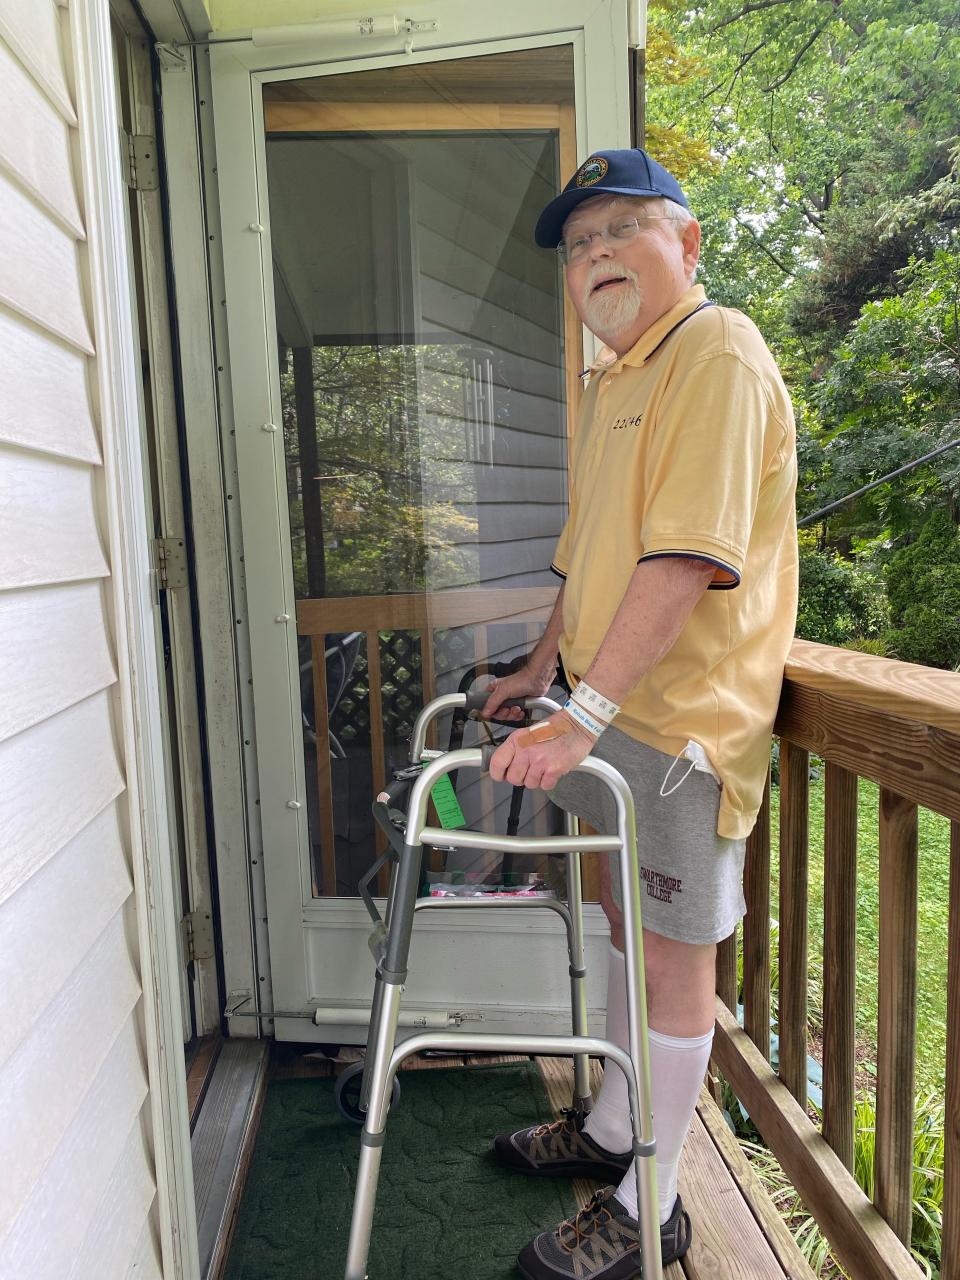 Falls Church, Virginia, City Councilman Phil Duncan, son of retired state Criminal Court of Appeals Judge Joe Duncan, is recovering at his home from a double lung transplant on May 2.